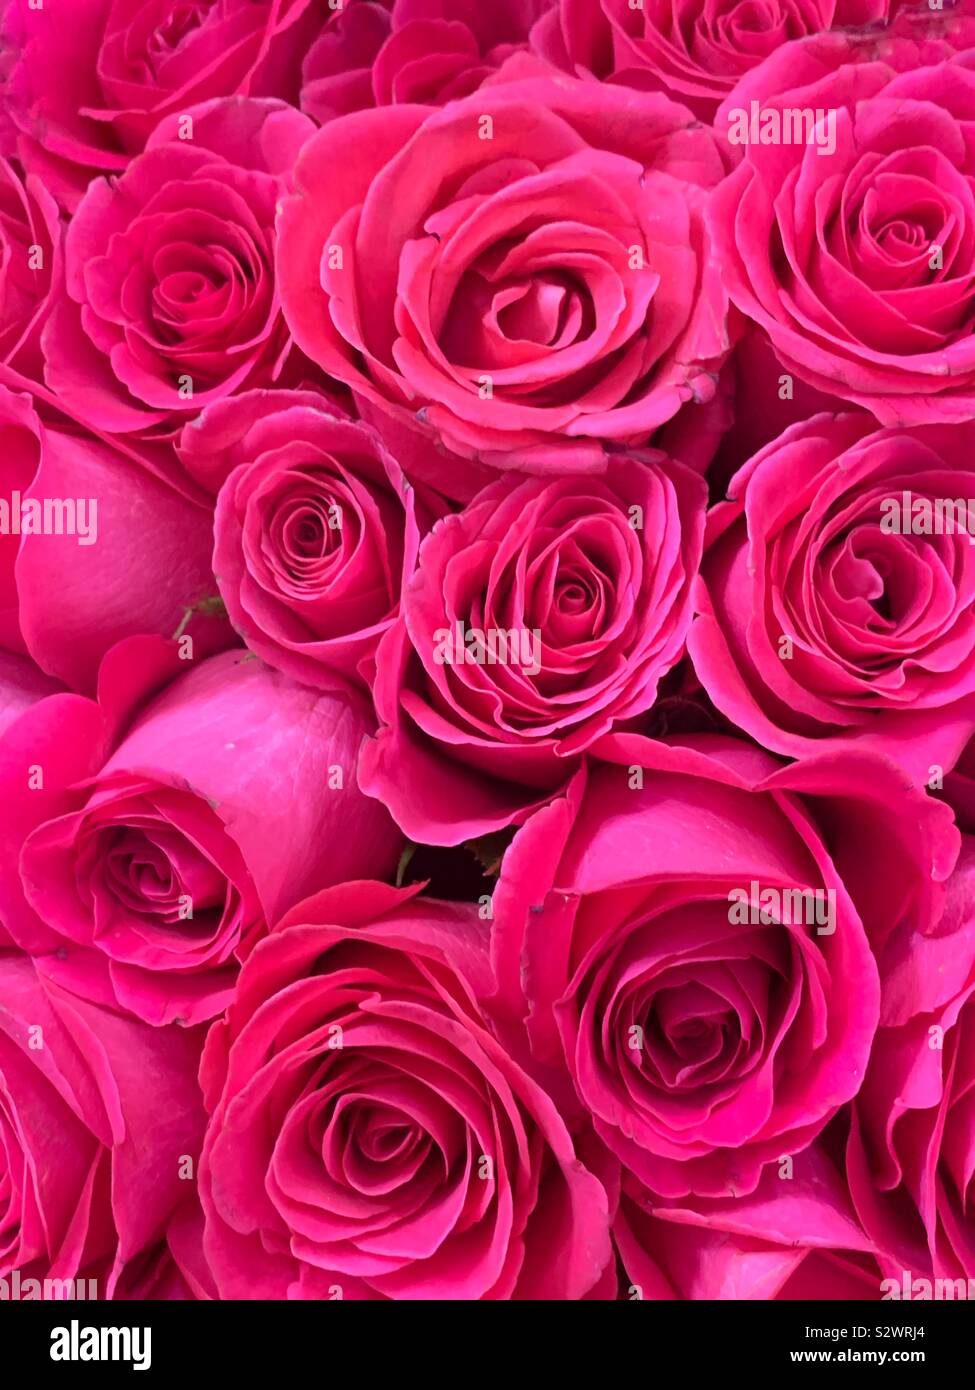 An Incredible Compilation of Over 999 Lovely Rose Images in Stunning 4K ...